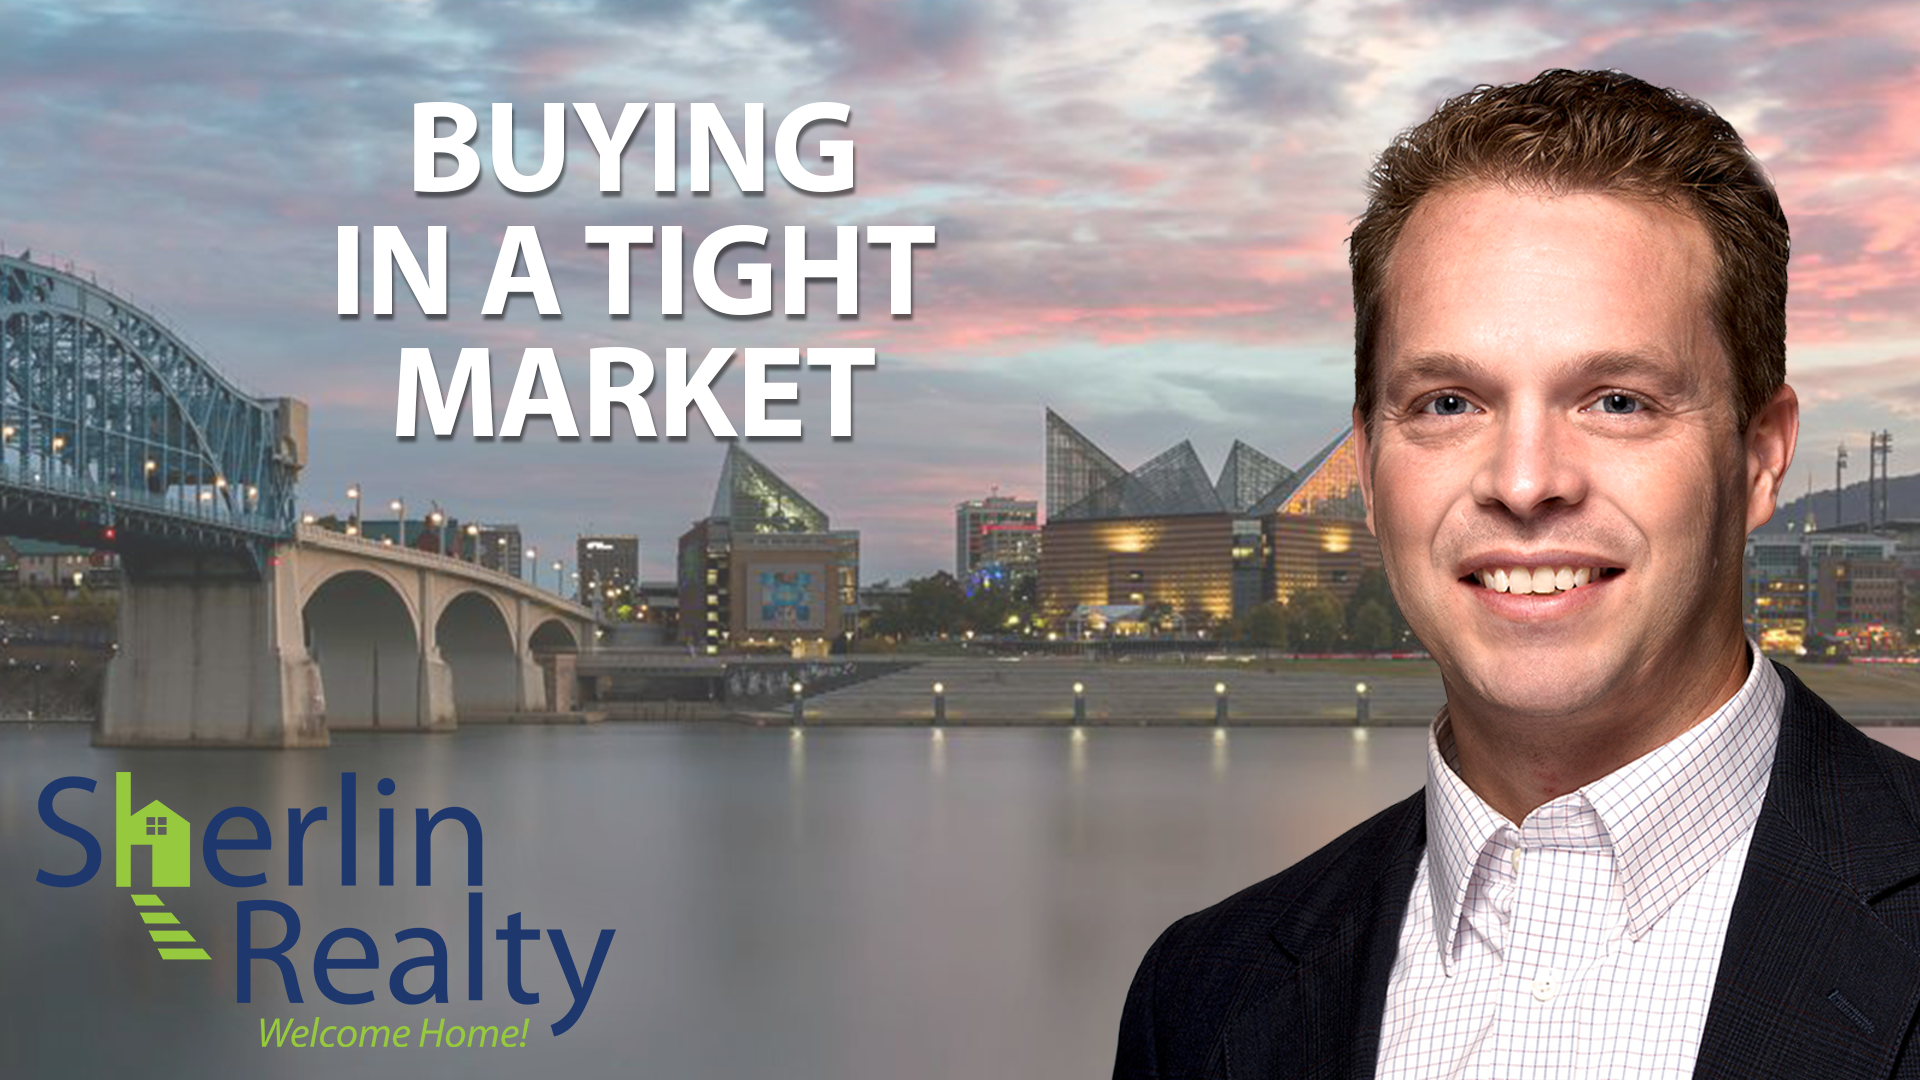 5 Tips for Buying in a Tight Market